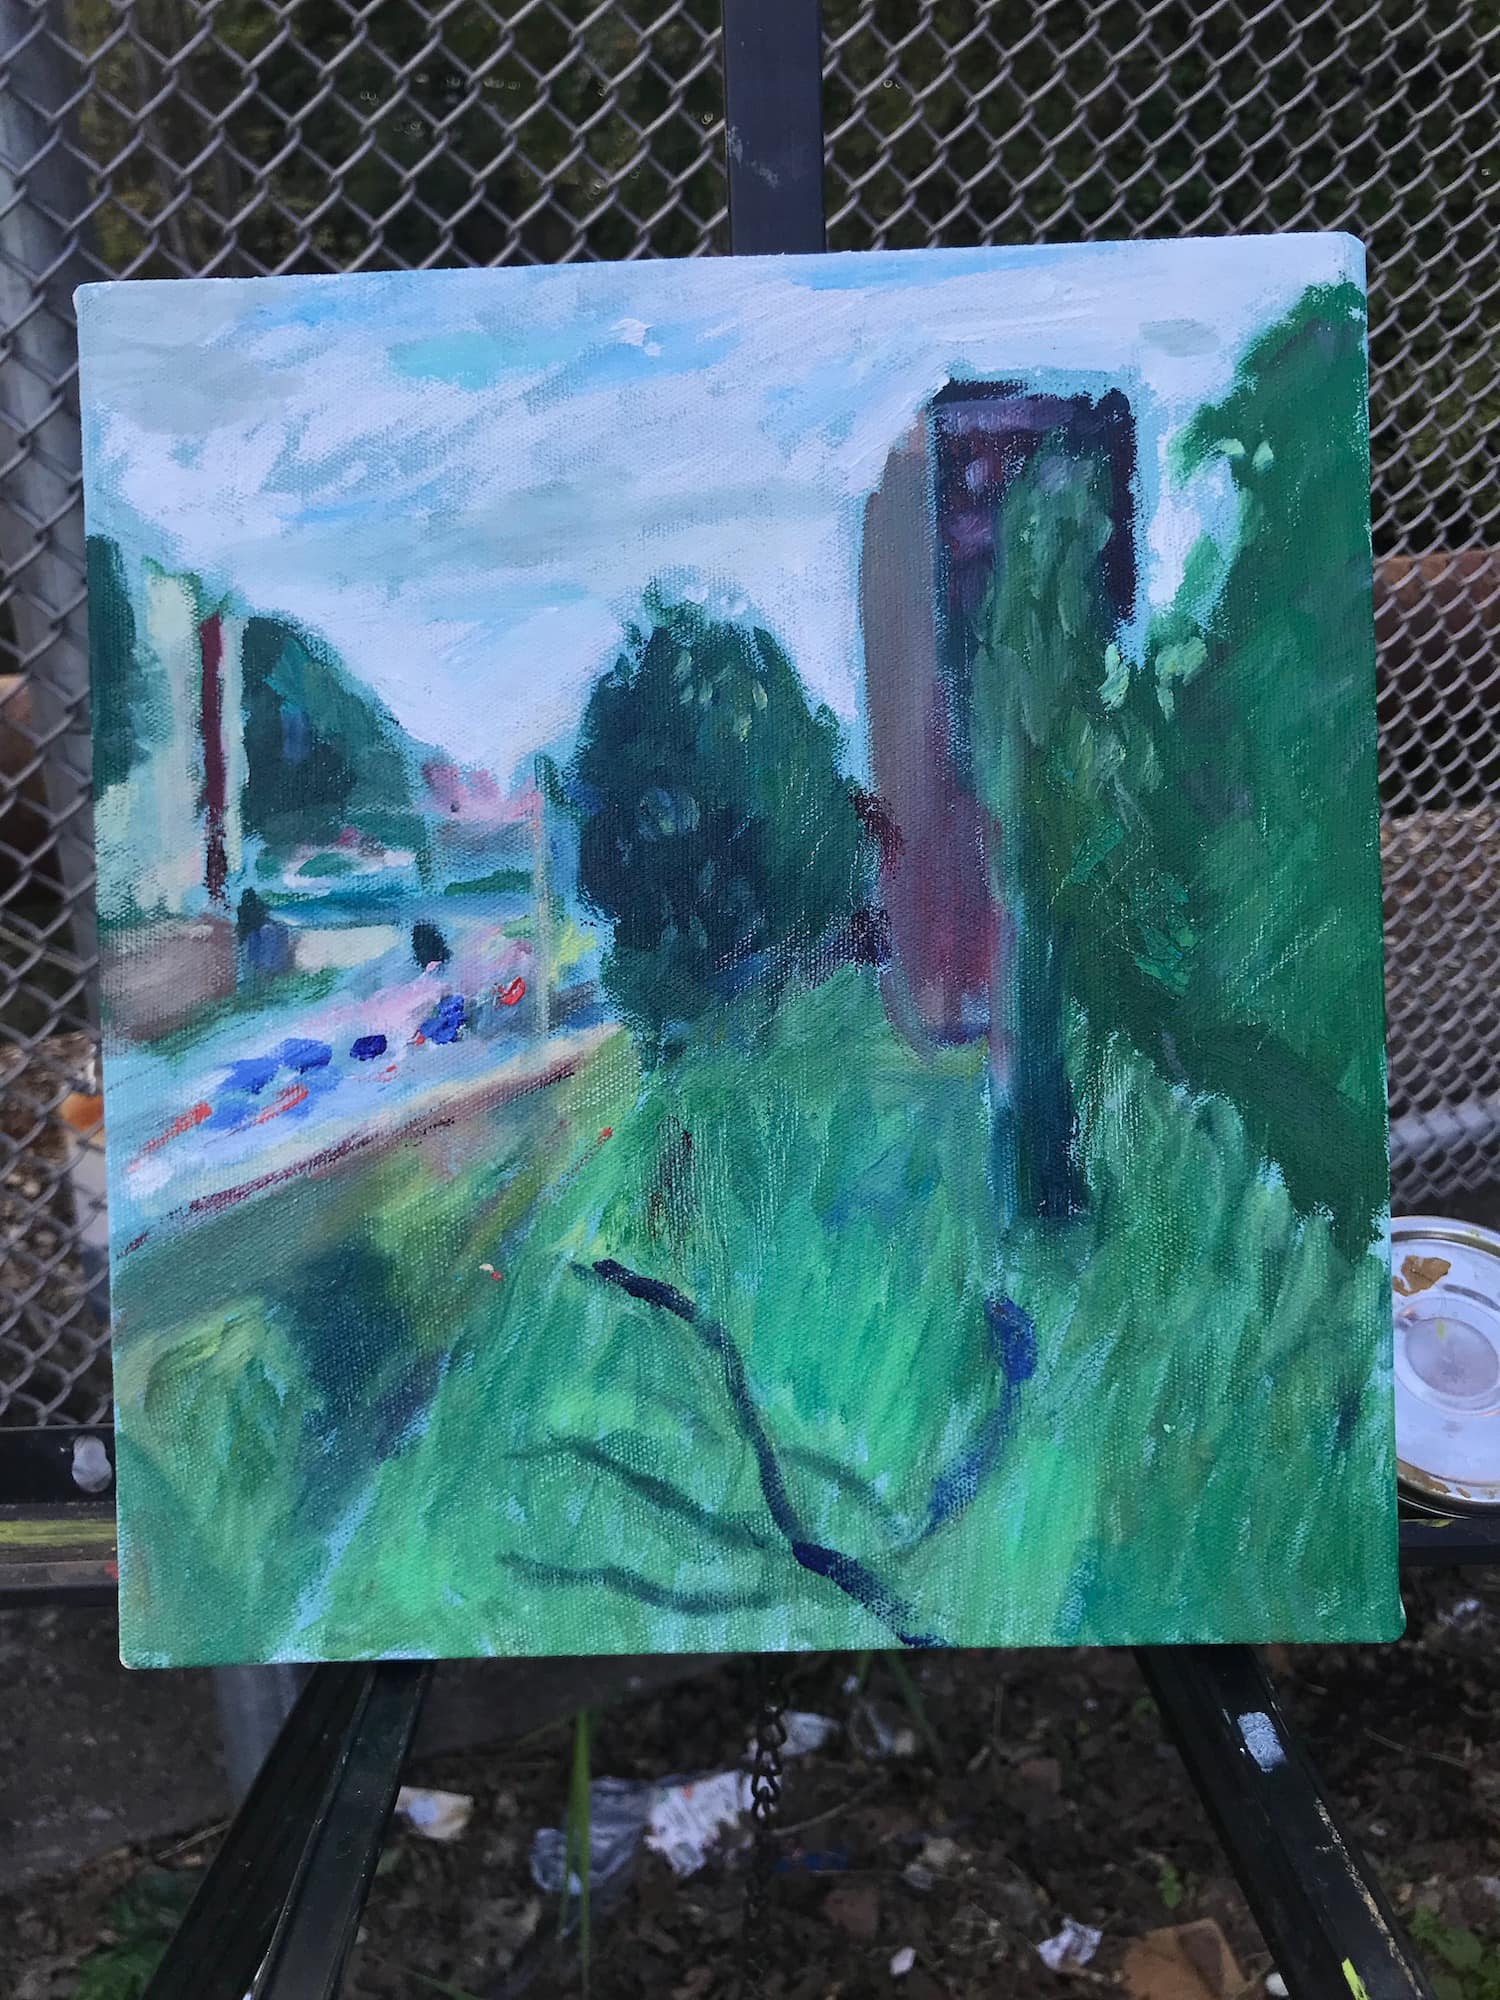 A partially completed painting on an easel depicting a green landscape with urban elements.